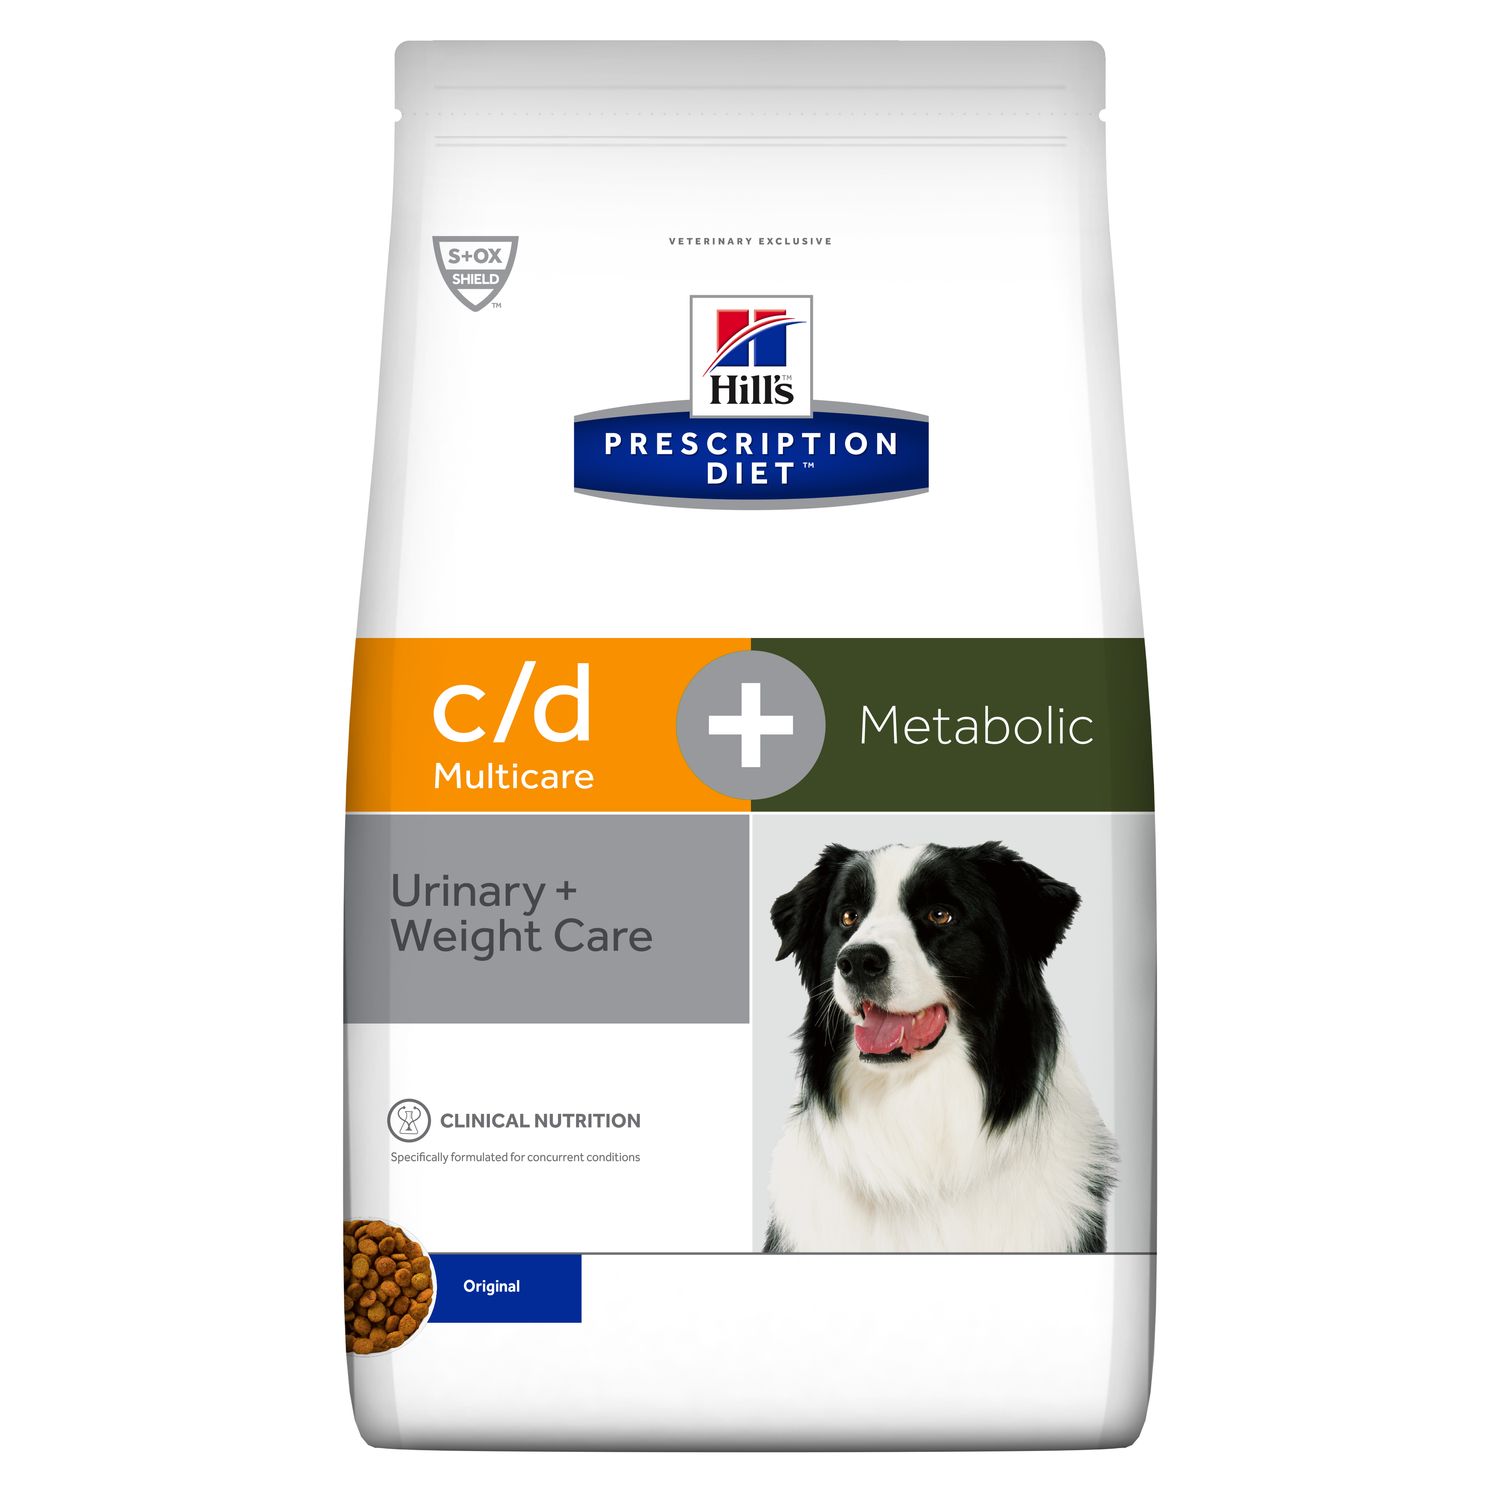 Hill's hond Multicare + Metabolic | c/d